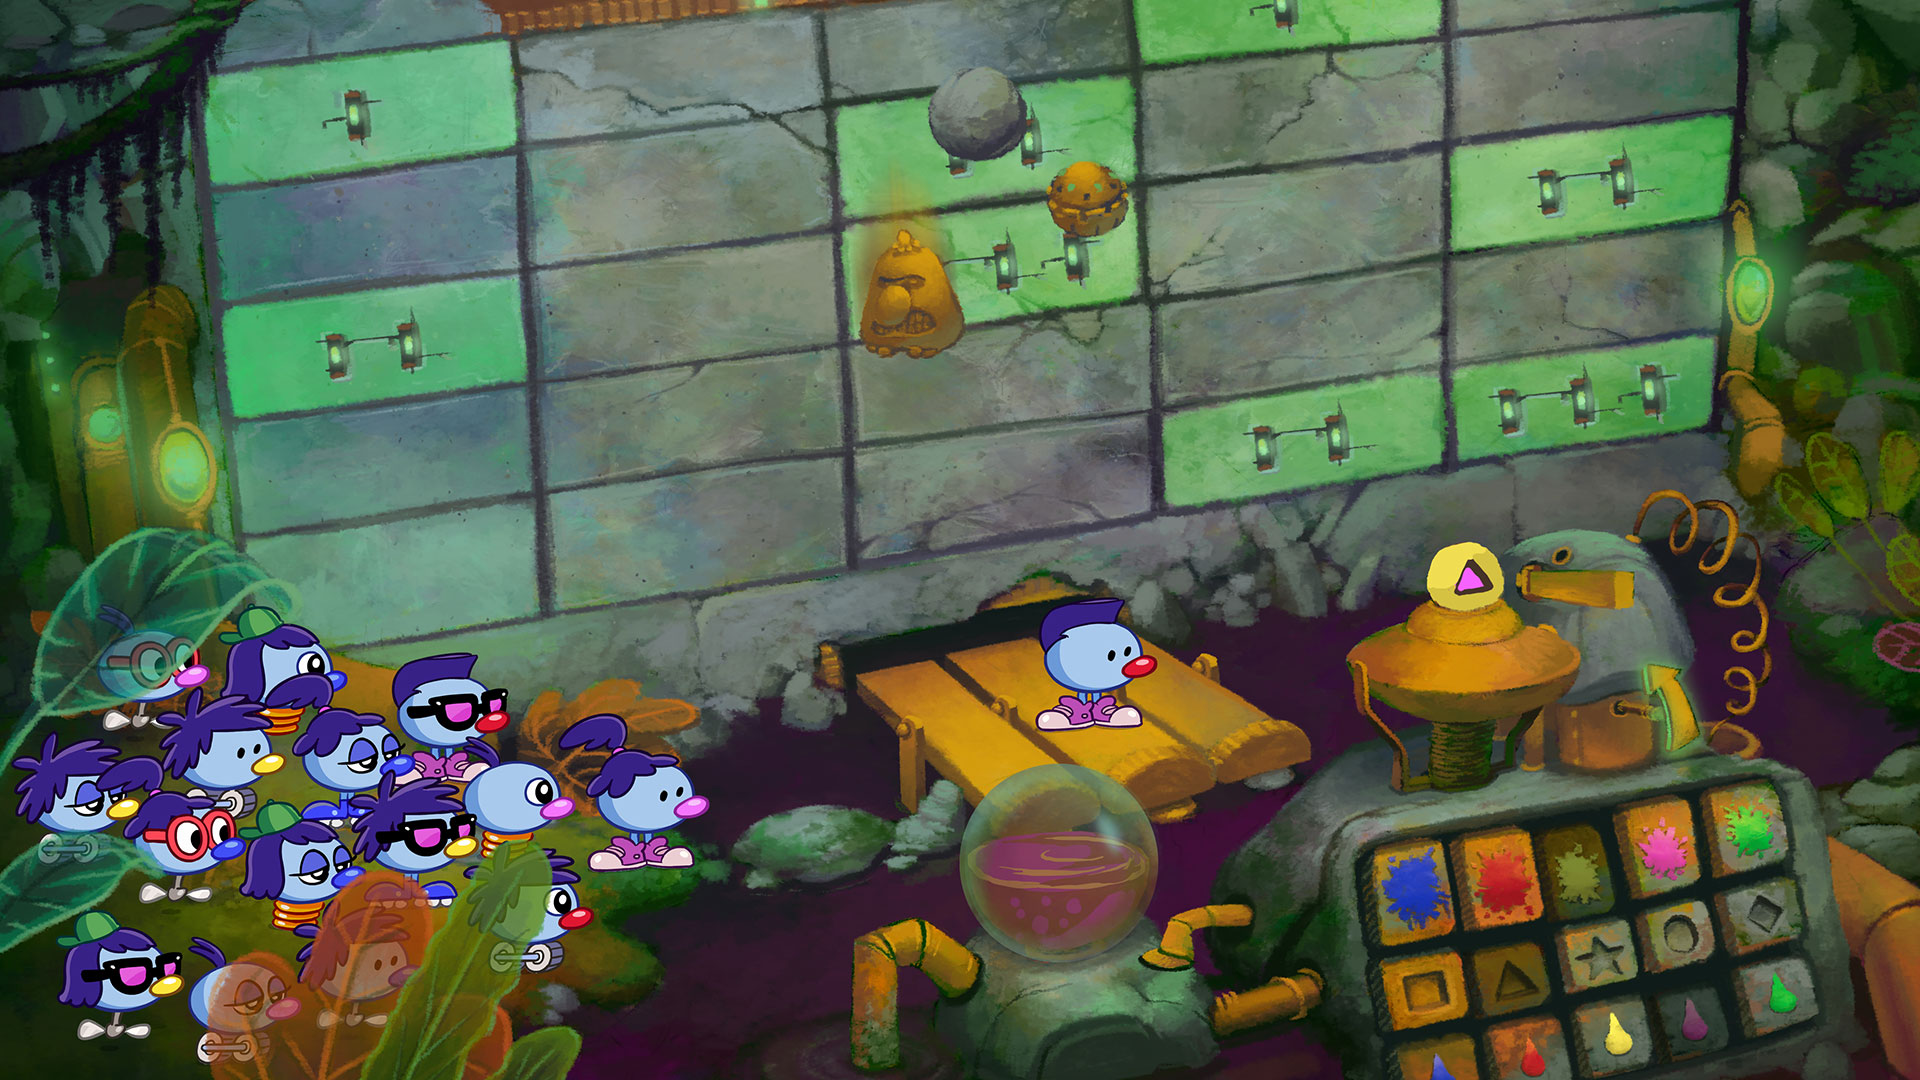 logical journey of the zoombinis free